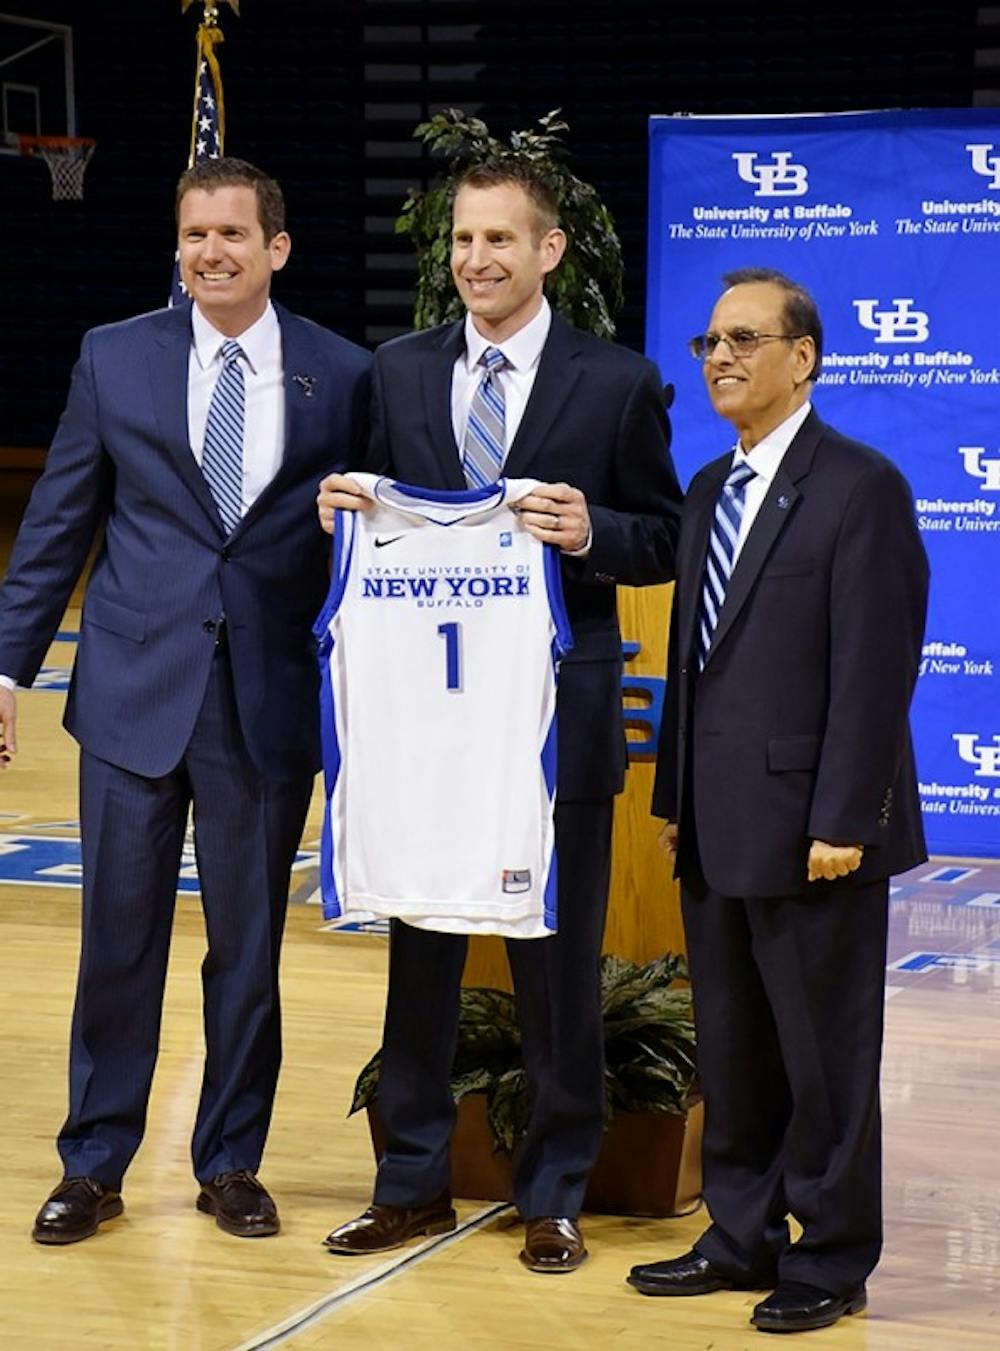 <p>New men's basketball head coach Nate Oats (center) poses with Athletic Director Danny White (left) and President Satish Tripathi (right) at his introductory press conference. Oats announced on Monday that his wife Crystal has been diagnosed with&nbsp;lymphoma.&nbsp;</p>